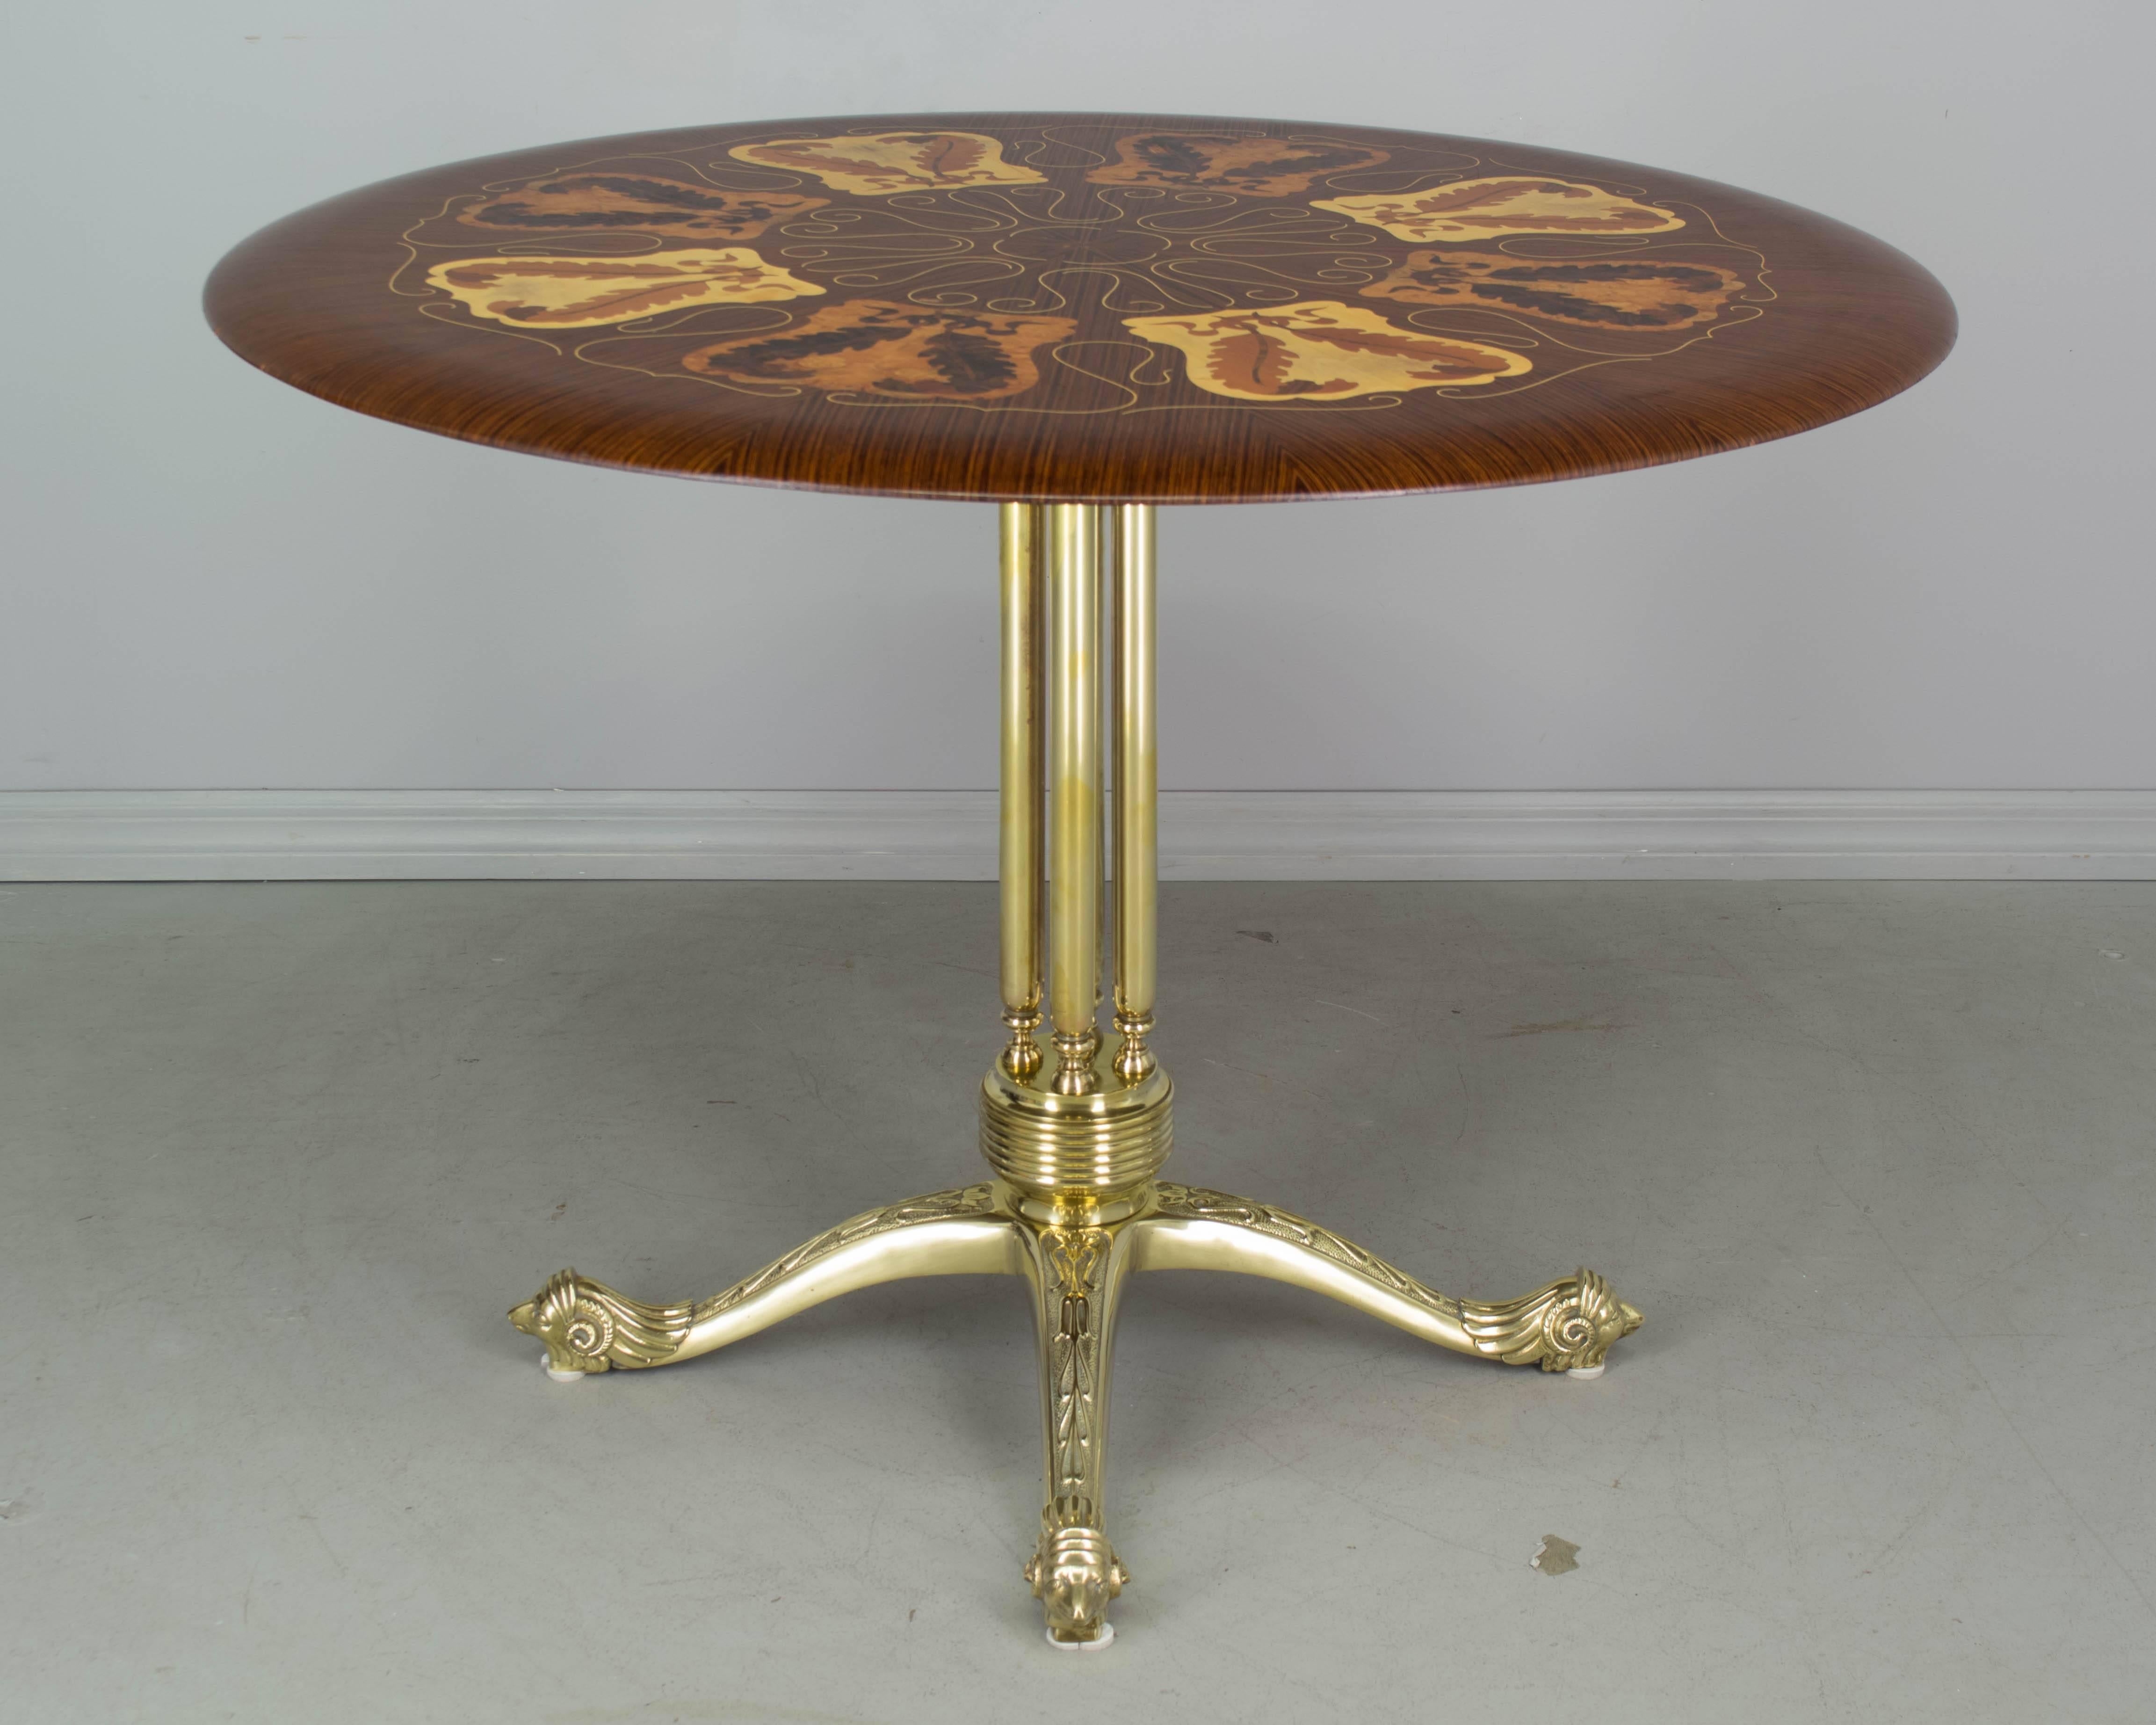 Italian Mid-Century circular table with brass base and marquetry top. Pedestal base with four central tubular columns. Solid brass legs with decorative embossed designs ending in sculptural ram's heads. Top is inlaid with exotic woods and has high